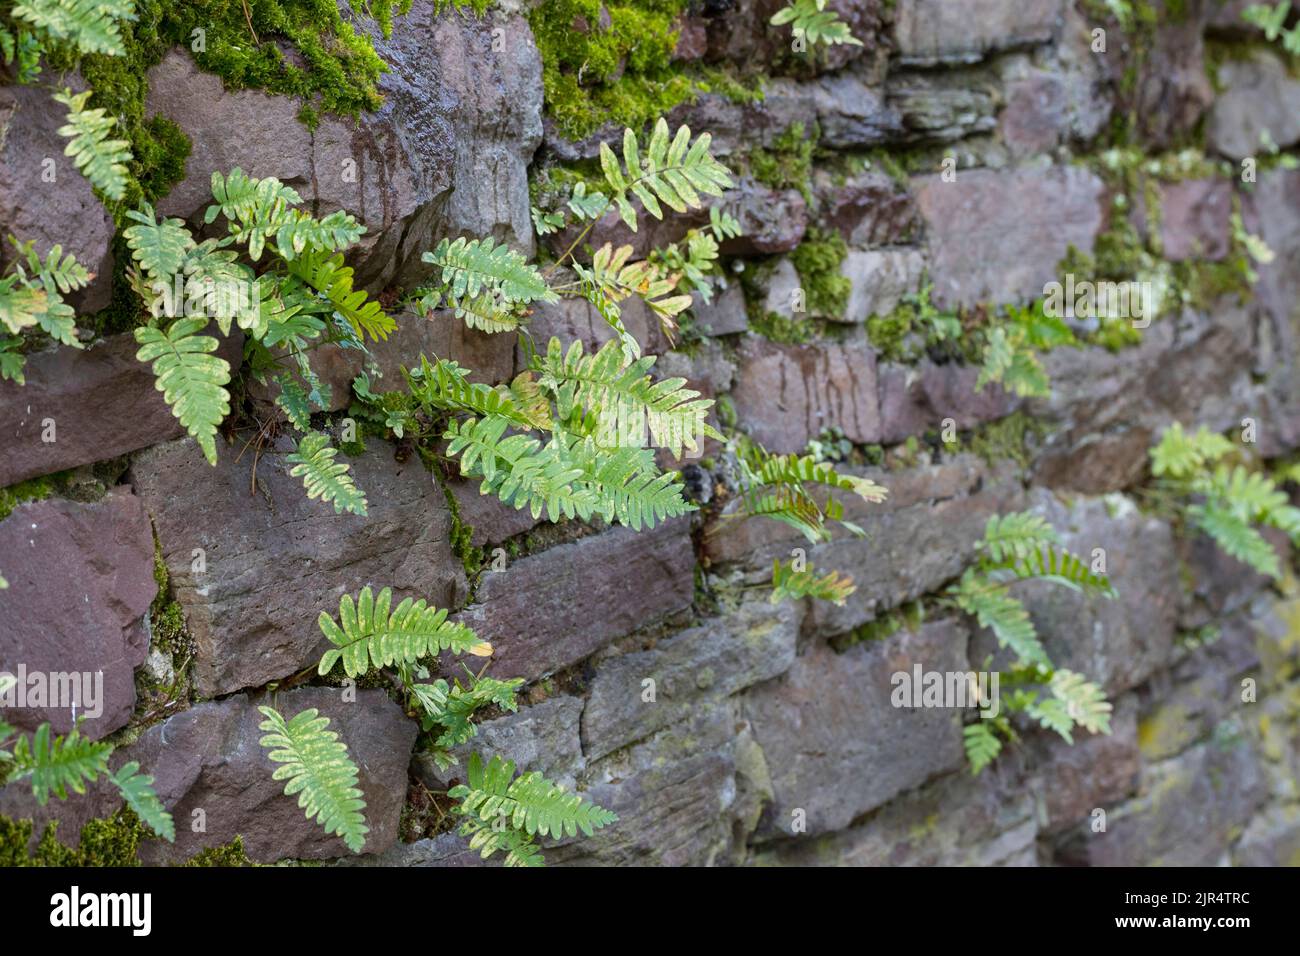 common polypody (Polypodium vulgare), grows in the gaps of a stone wall, Germany Stock Photo